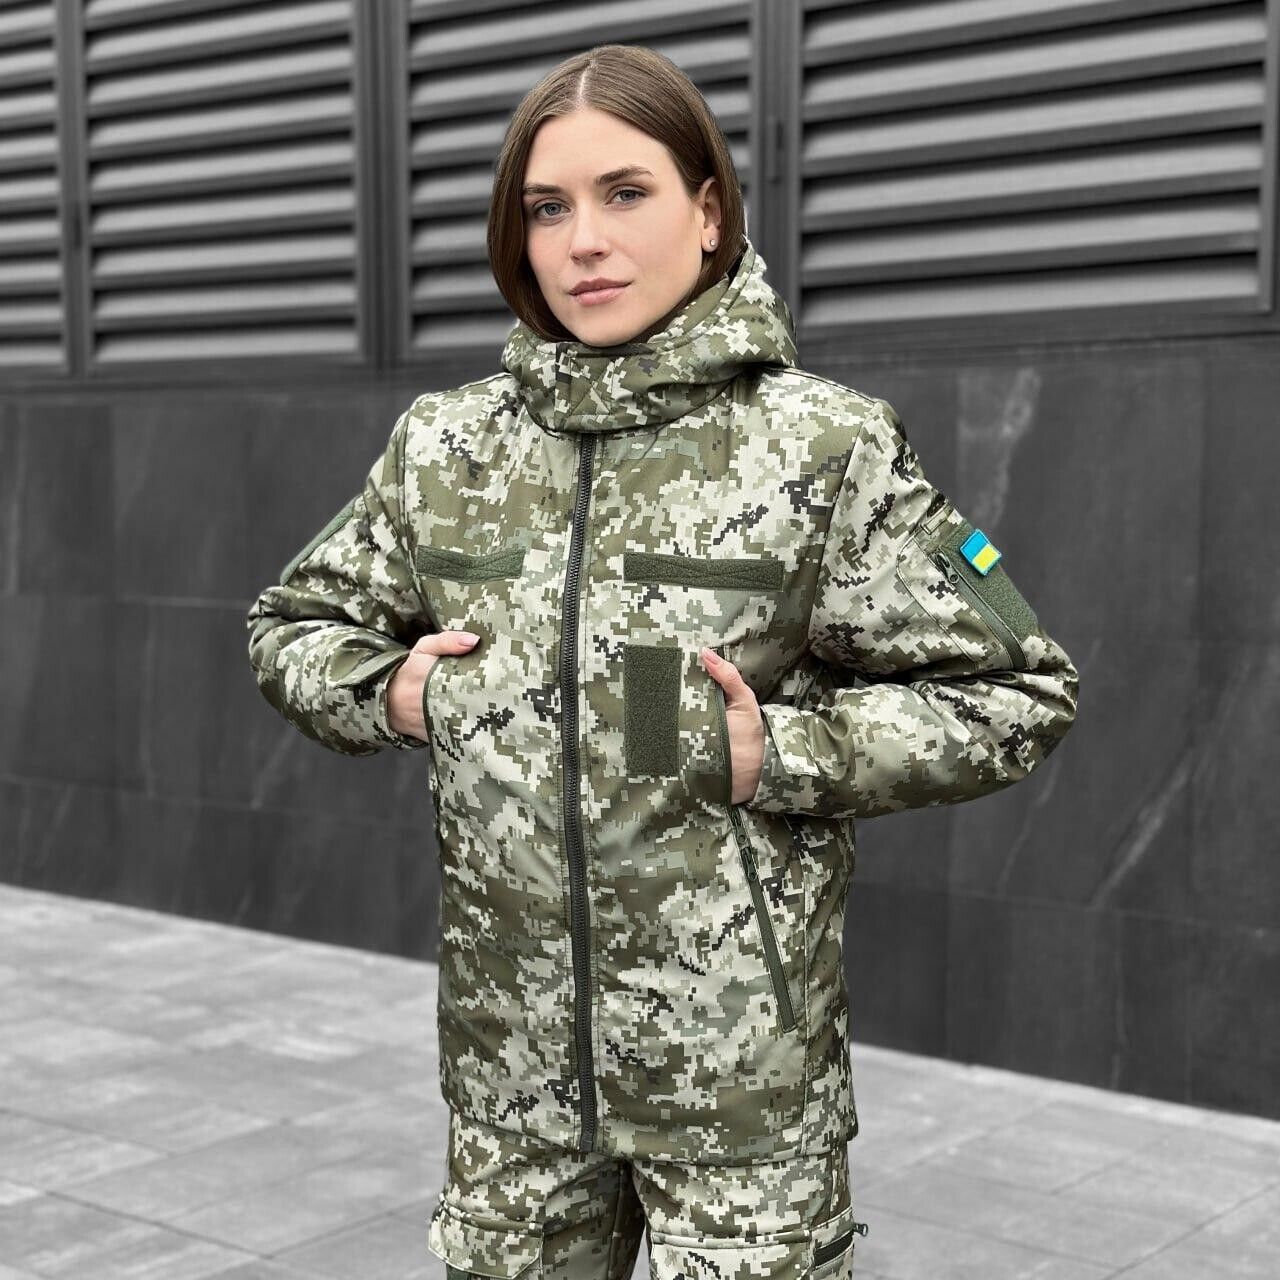 Women's tactical winter jacket Motiv up to -20*C warm pixel Army military jacket